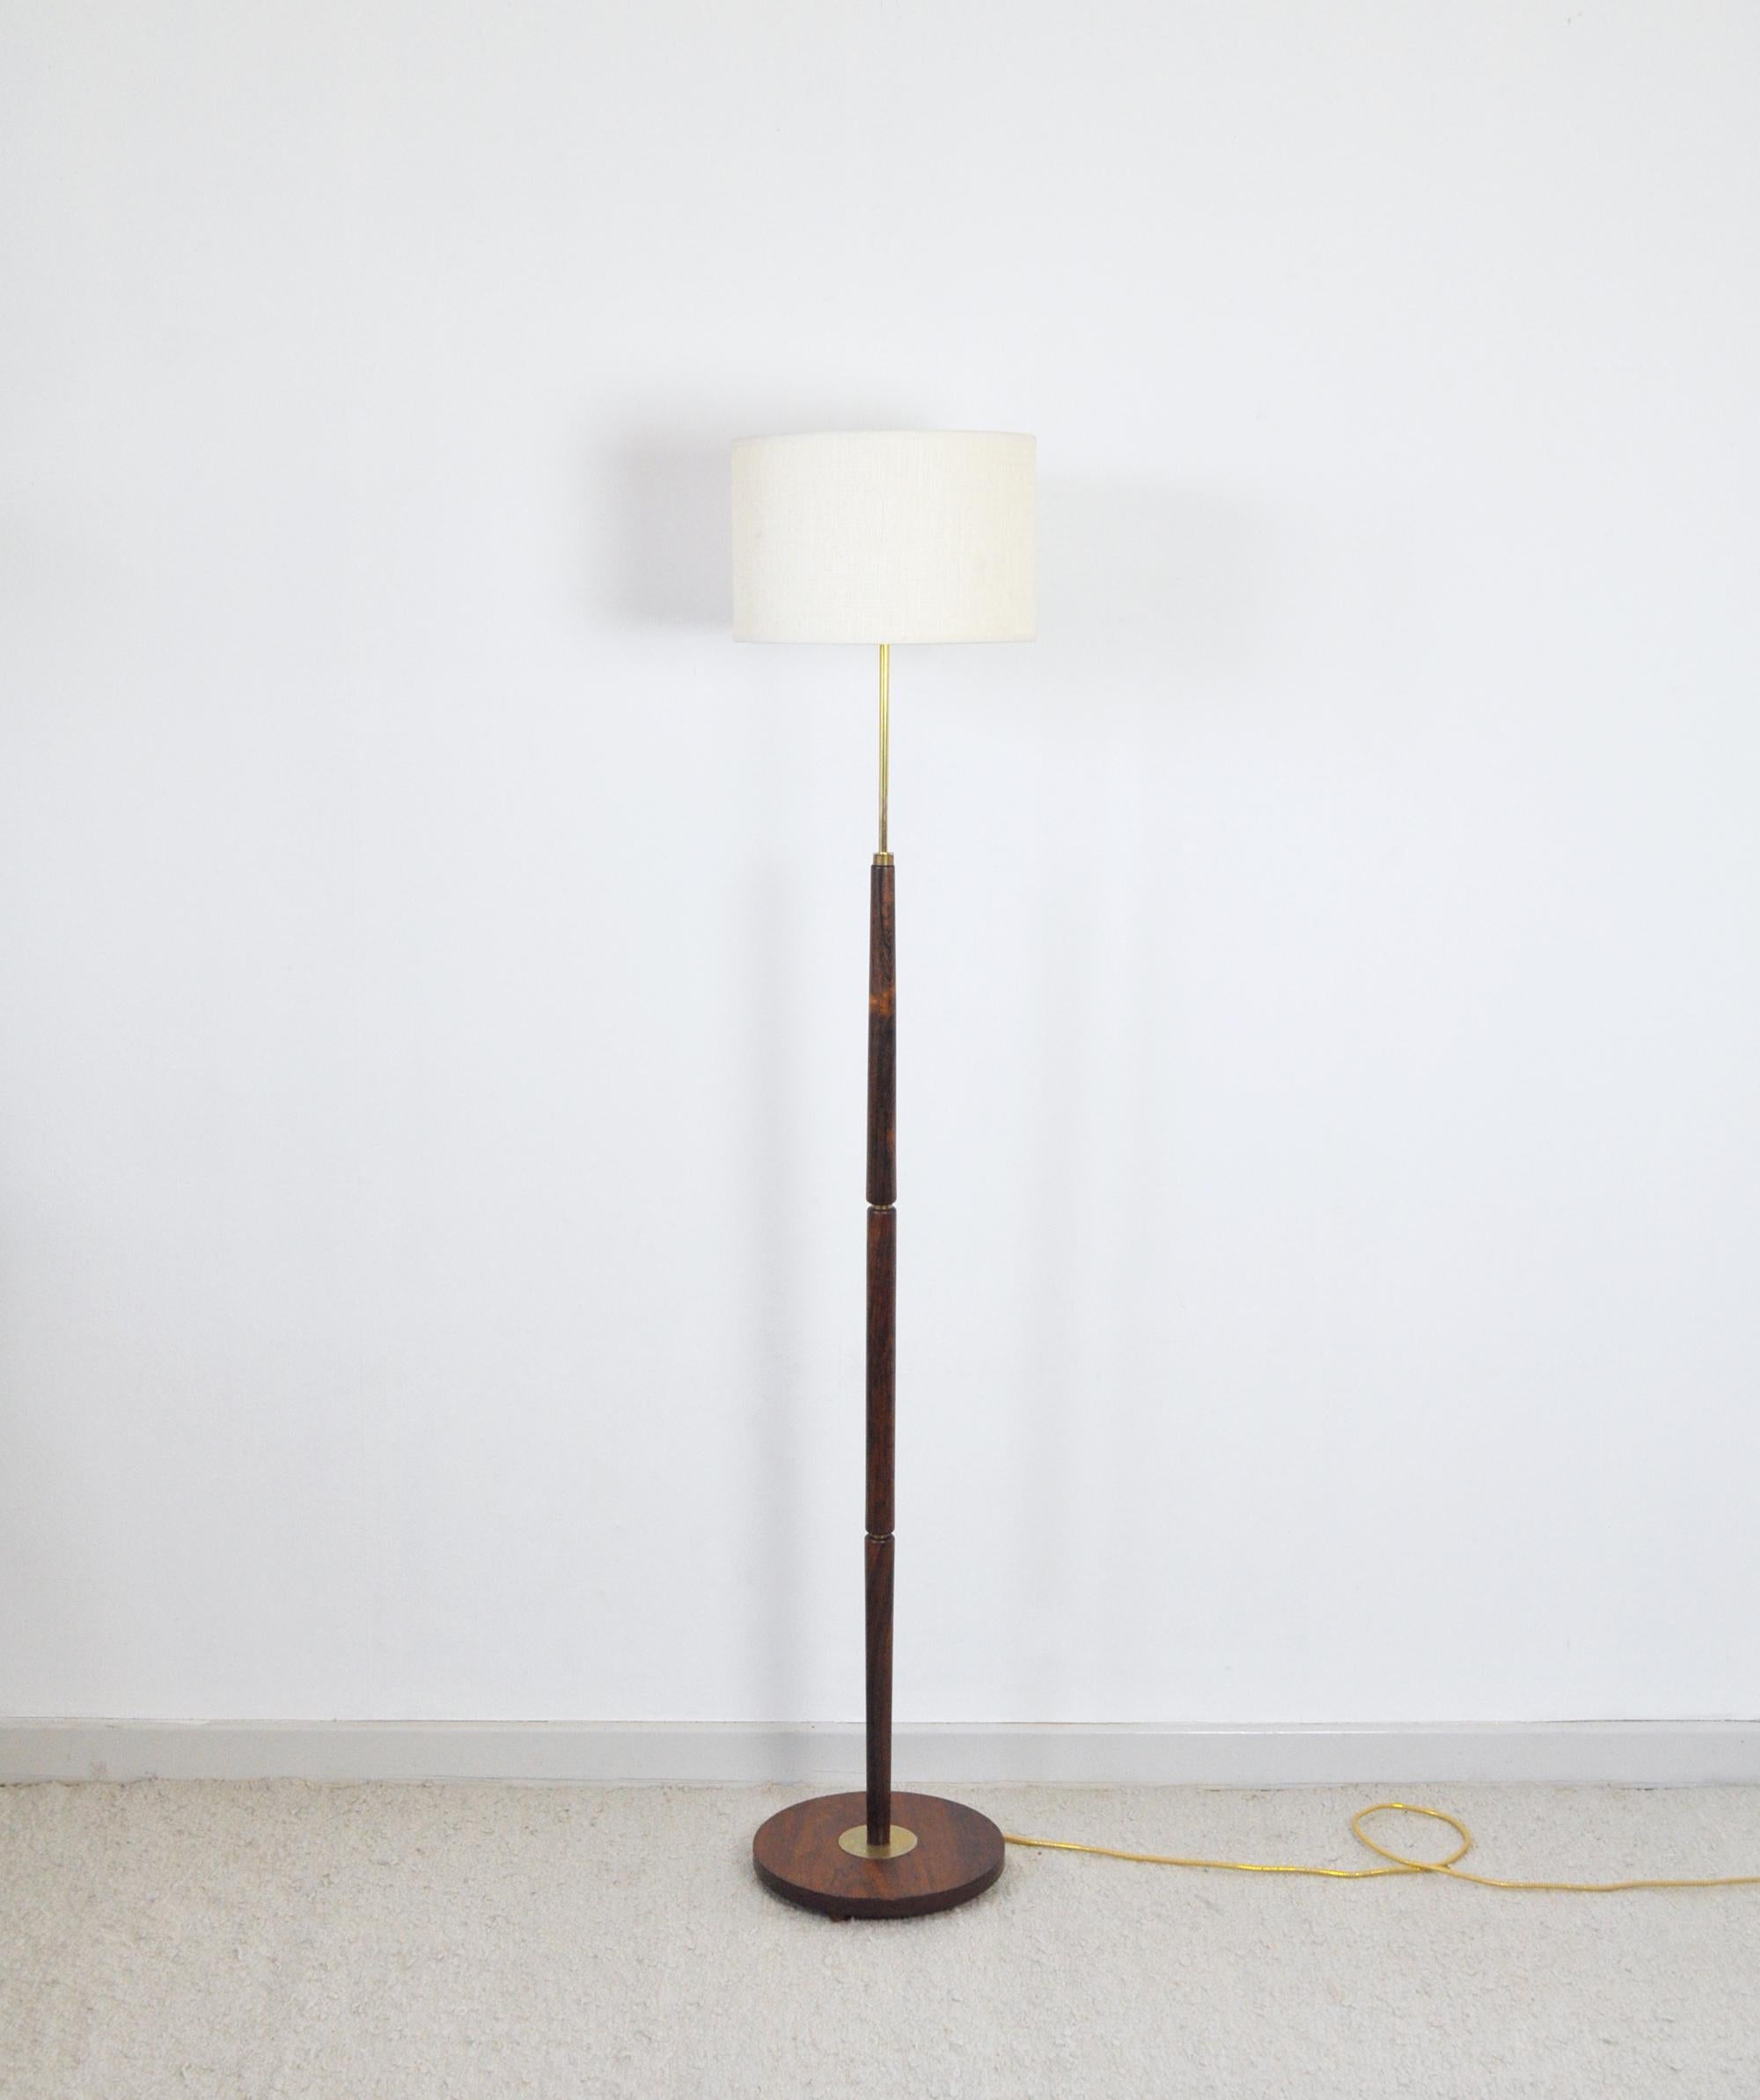 Mid-Century Modern rosewood floor lamp with brass details. 
Denmark the 1960s. 
Item comes without shade.

Measures: Lamp base diameter 28 cm
Height 140 cm to socket.